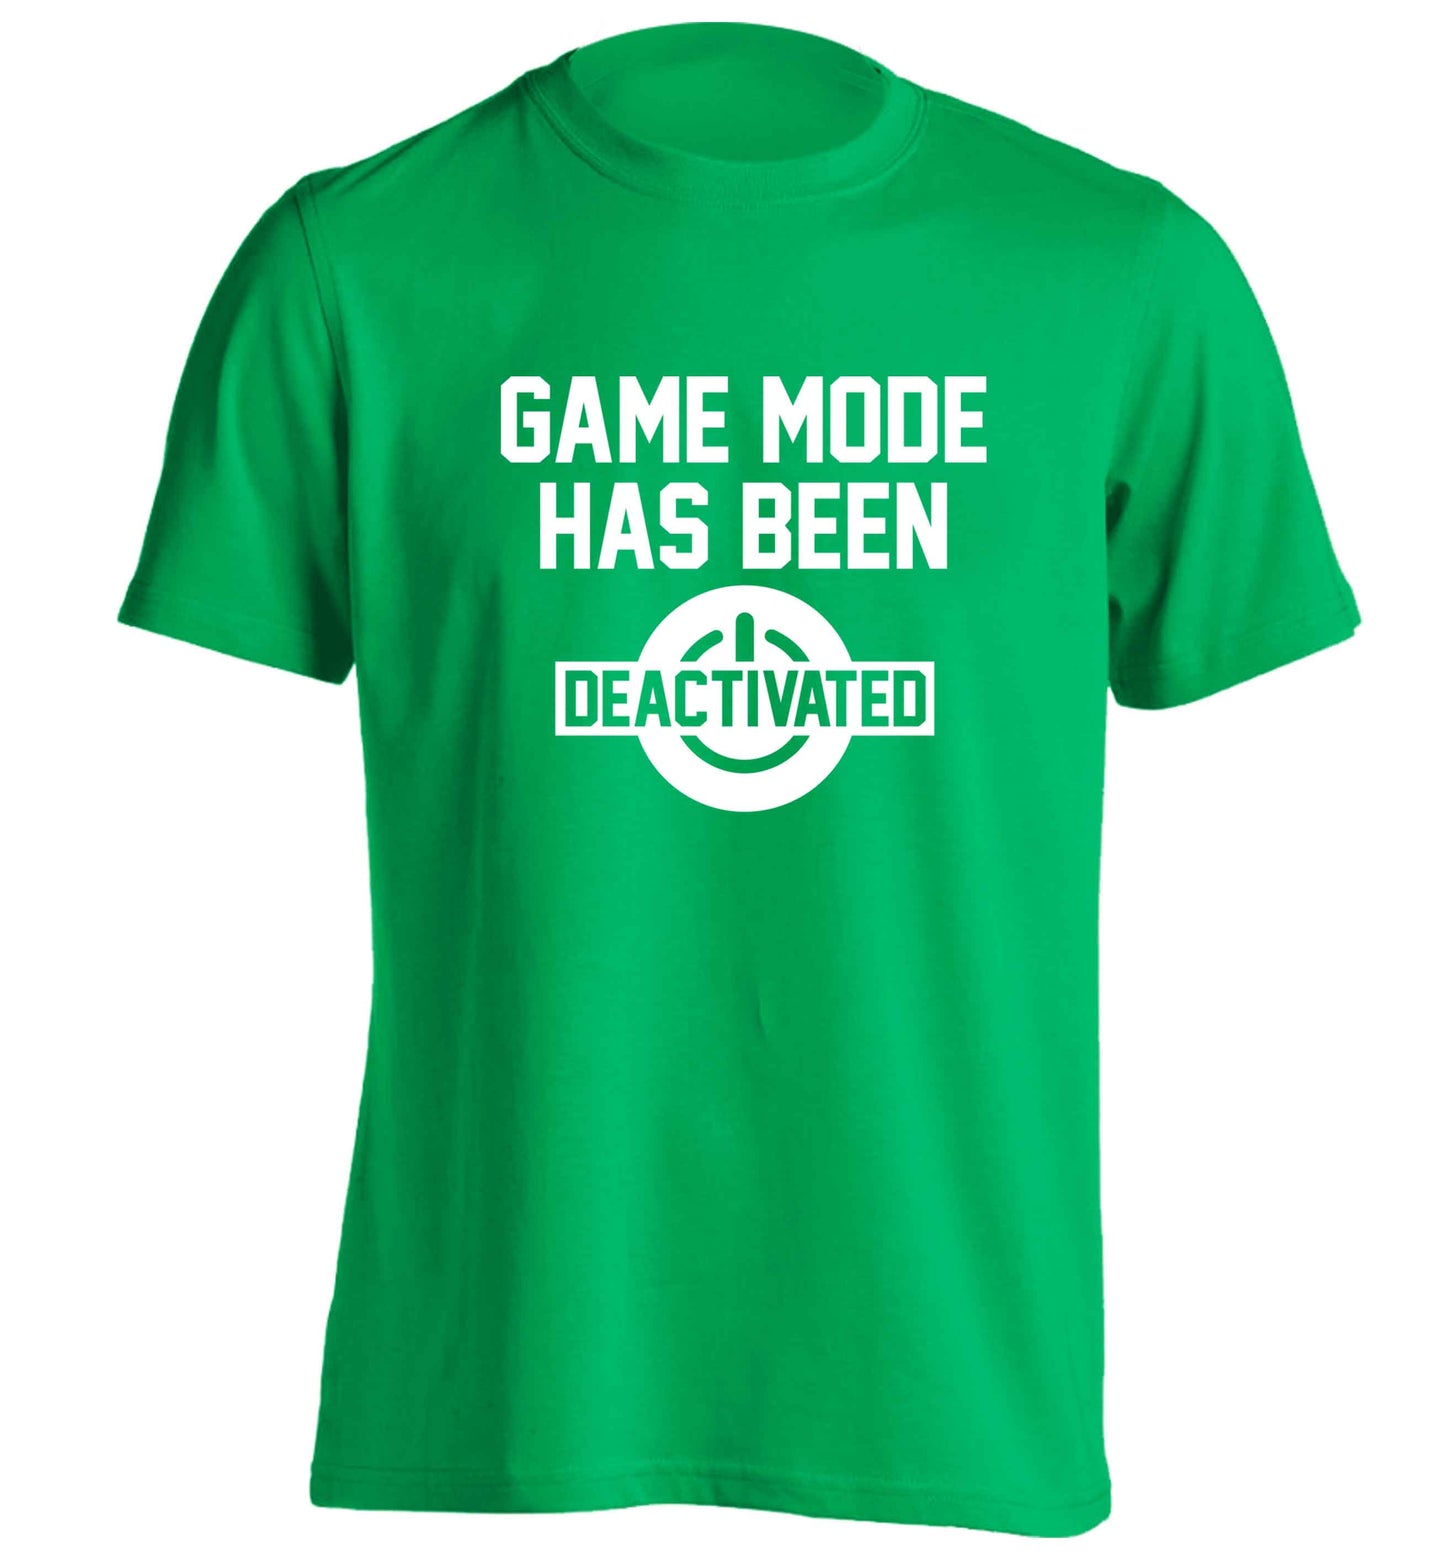 Game Mode Has Been Deactivated adults unisex green Tshirt 2XL